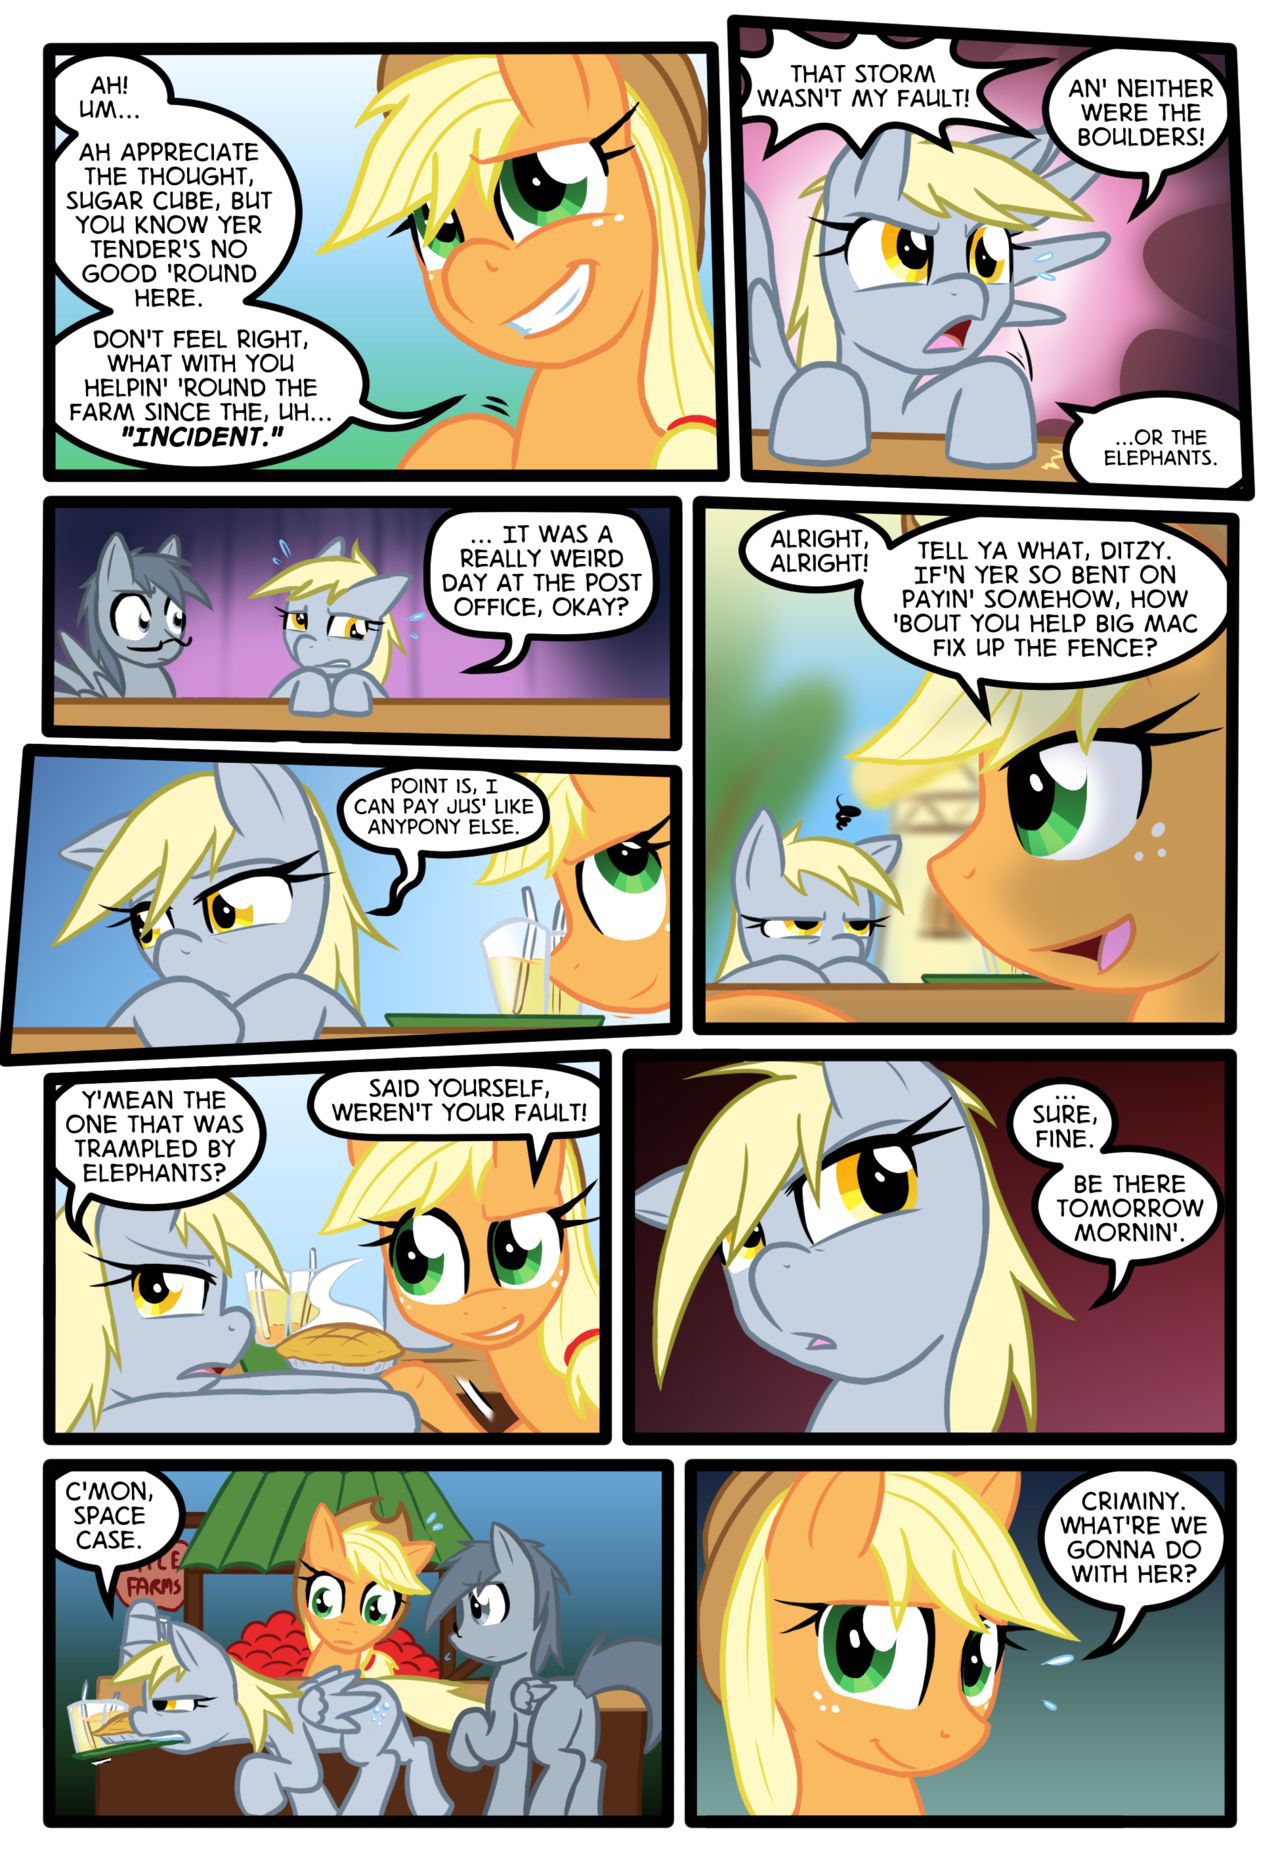 [Zaron] Lonely Hooves (My Little Pony Friendship Is Magic) [Ongoing] 15